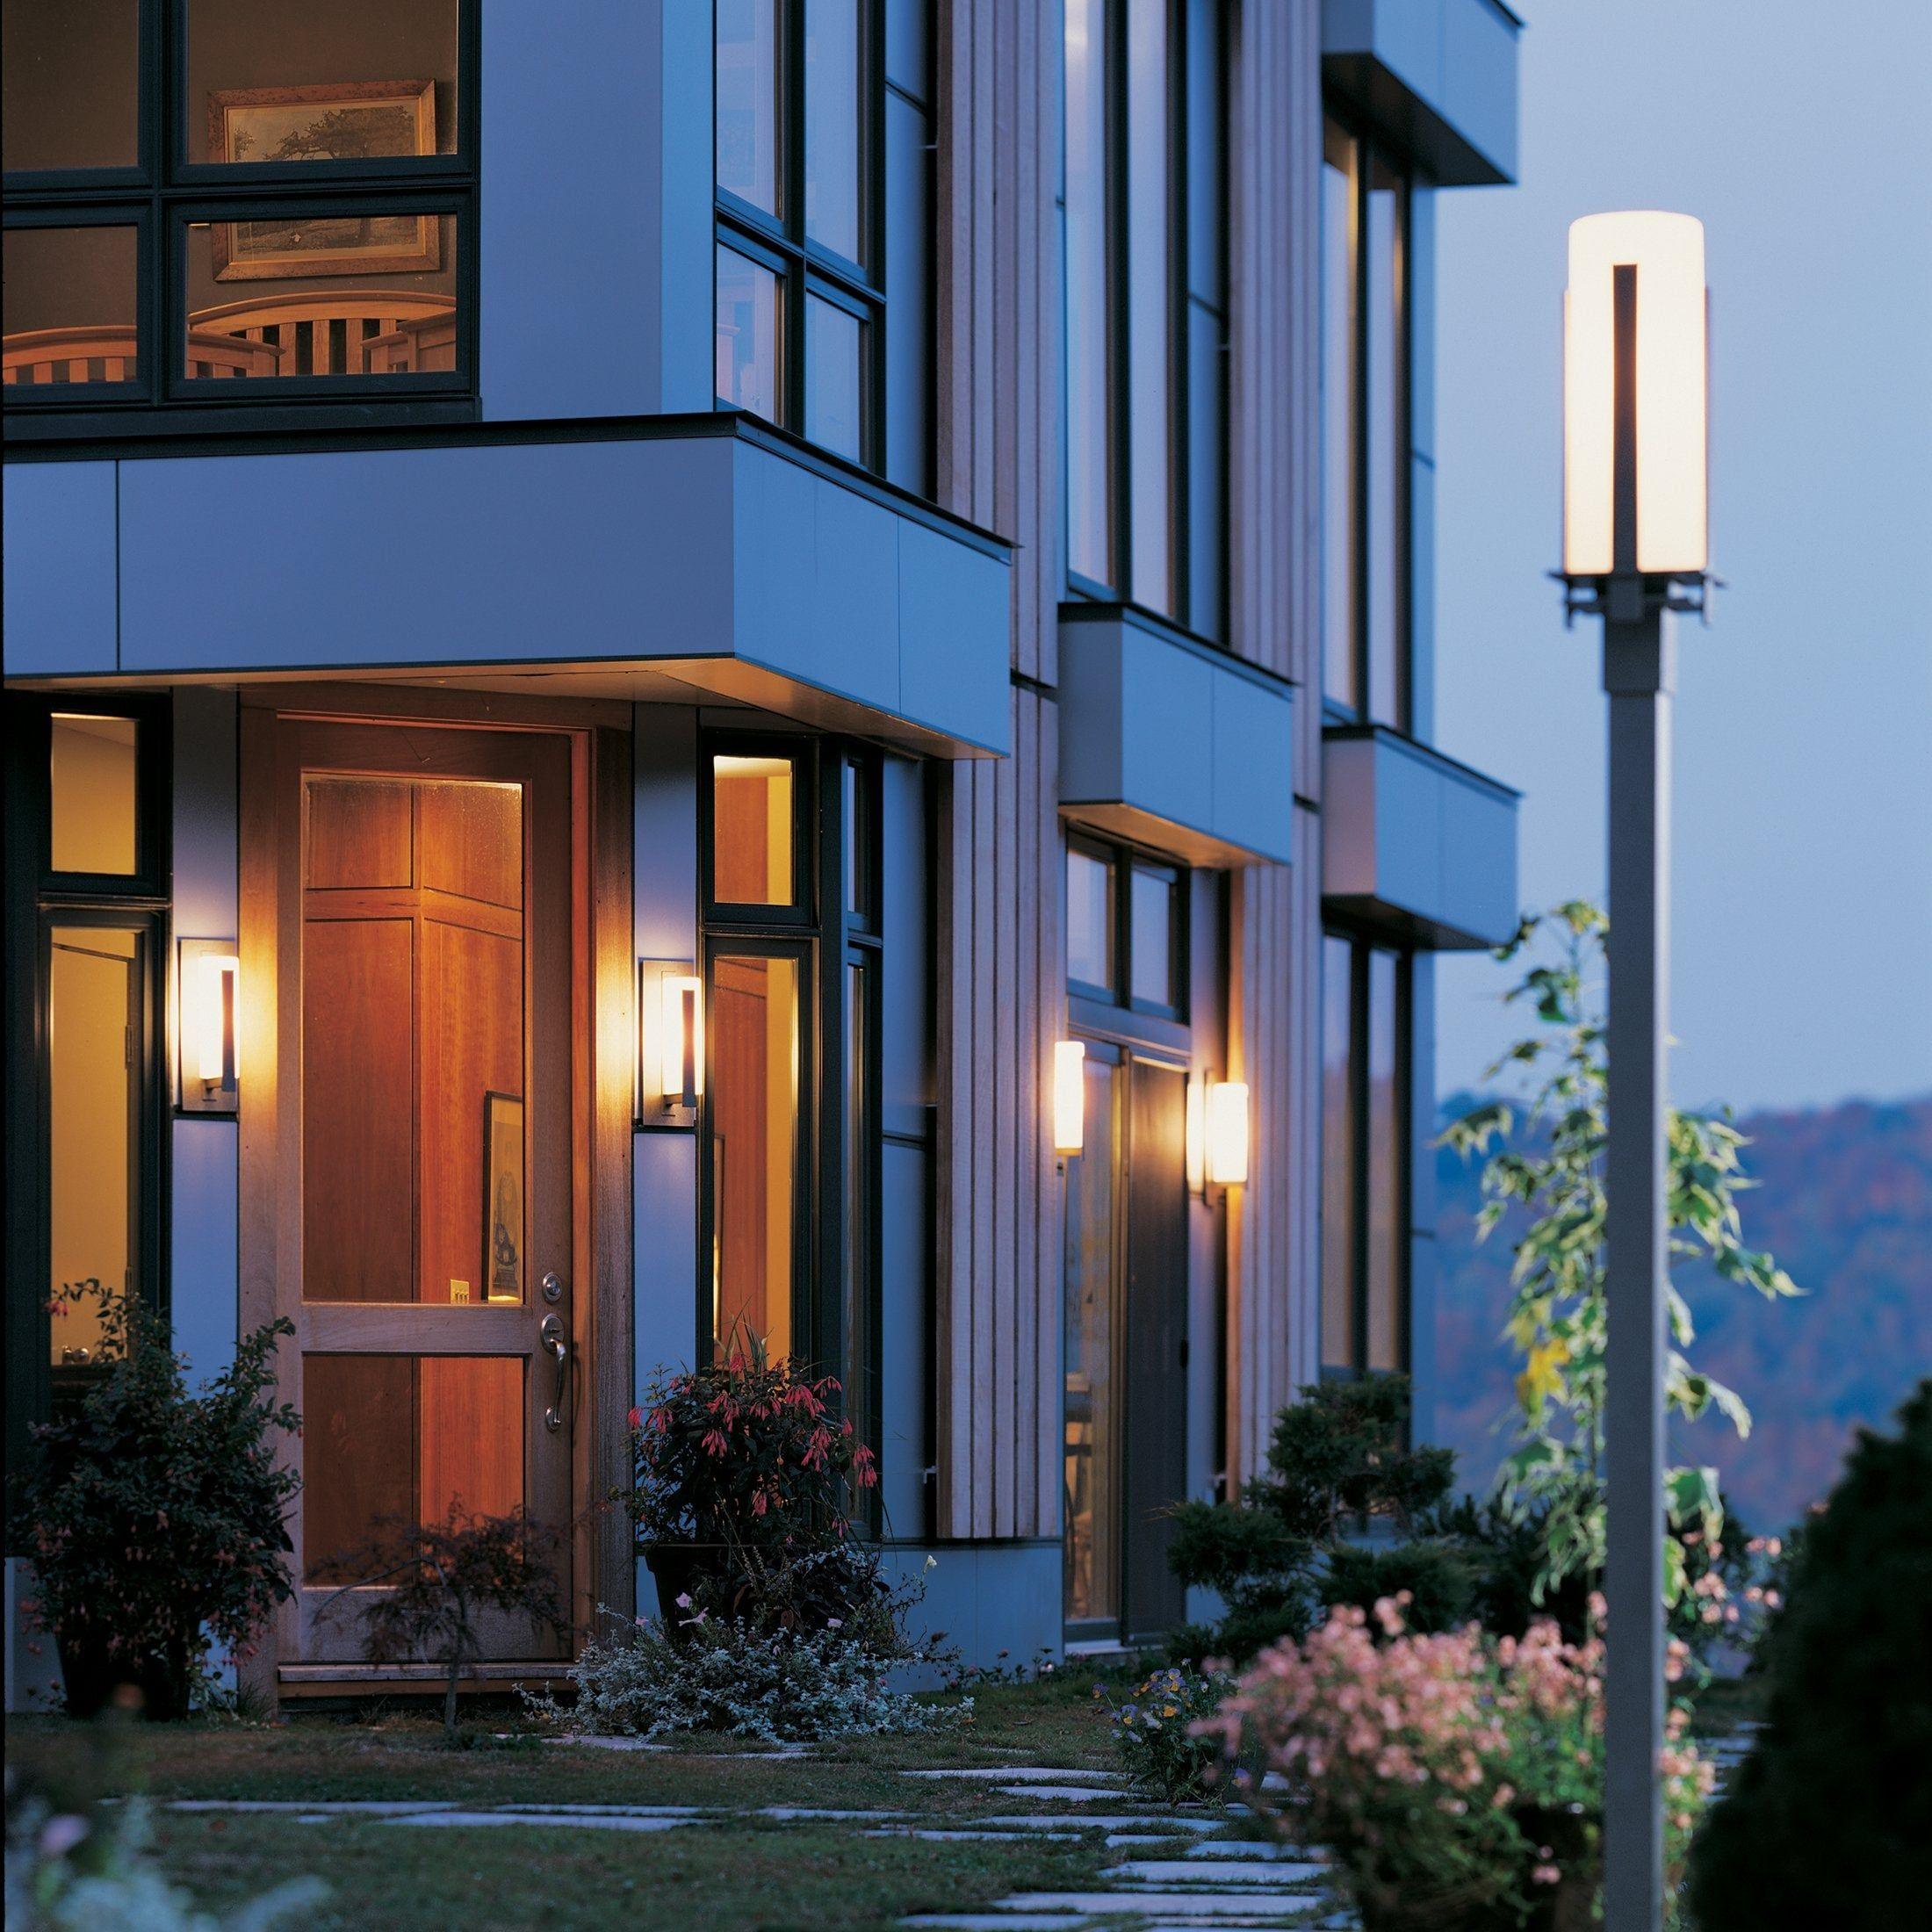 Hubbardton Forge - Forged Vertical Bar Post-Light - Lights Canada